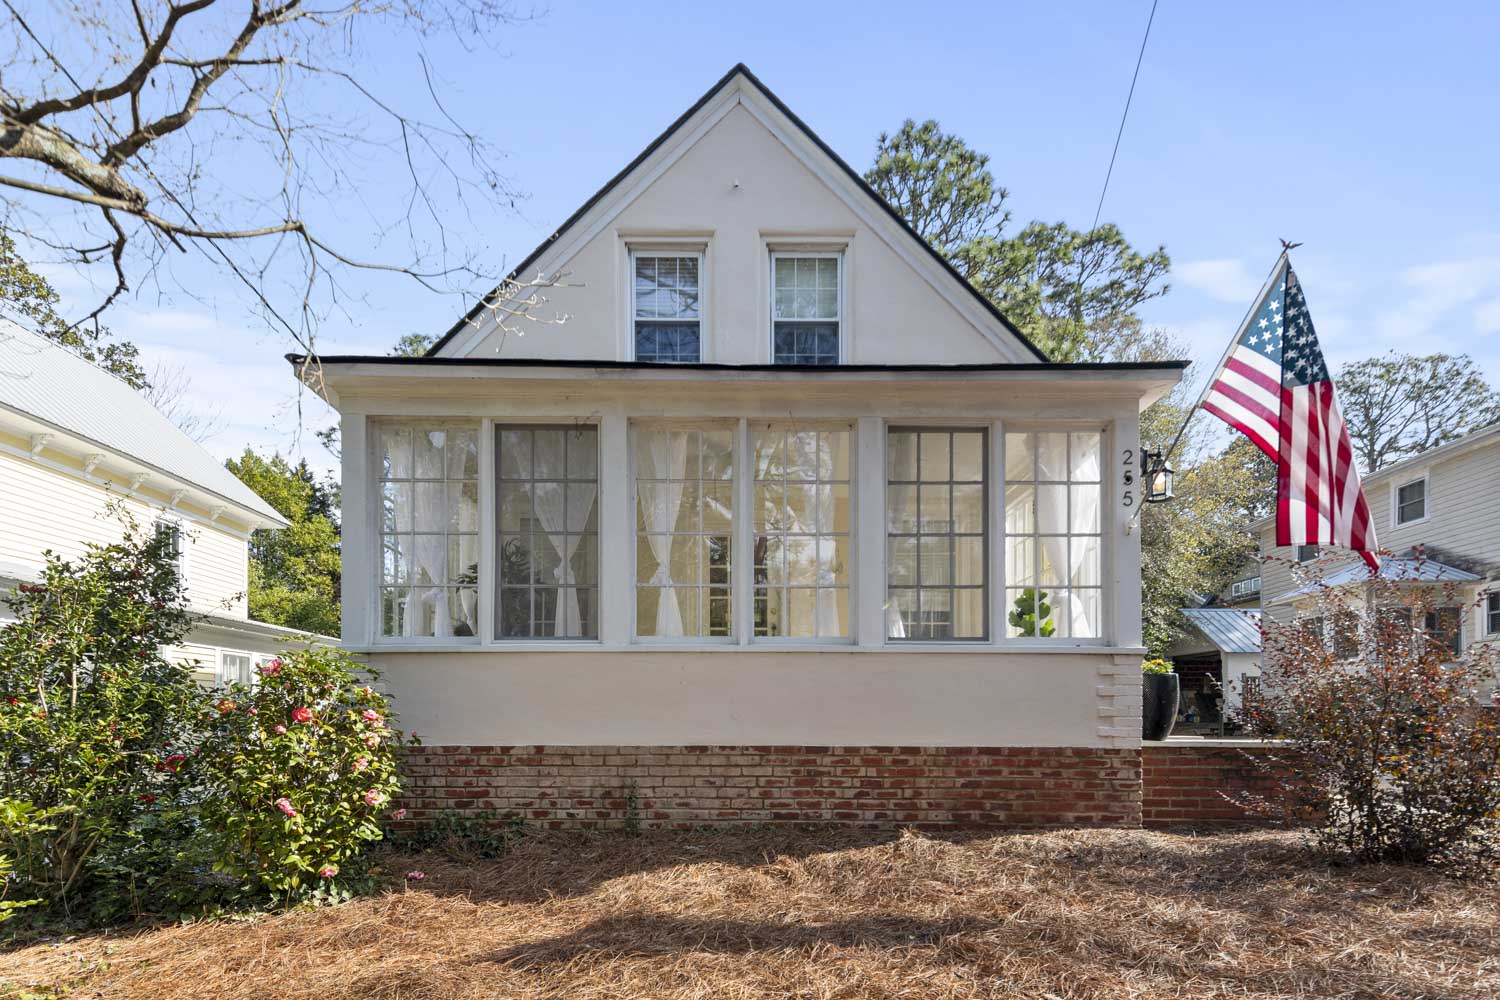 Love Pines Realty Announces 255 E Connecticut Ave, Southern Pines Cottage Home for Sale